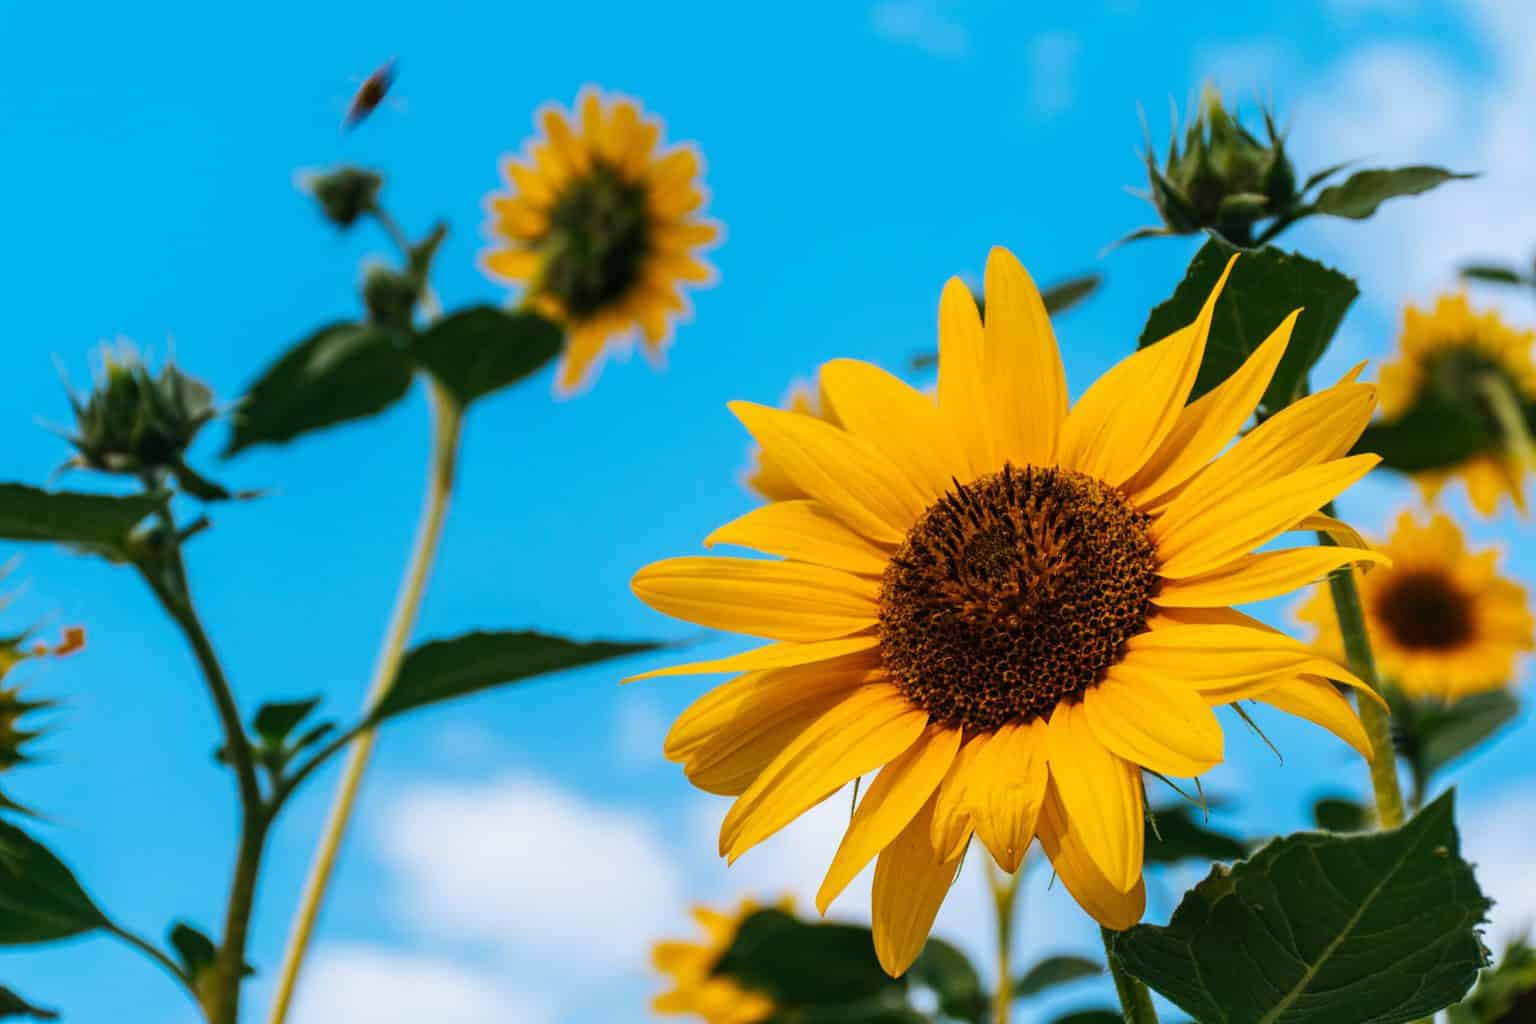 sunflowers growing in a group with a blue sky in back